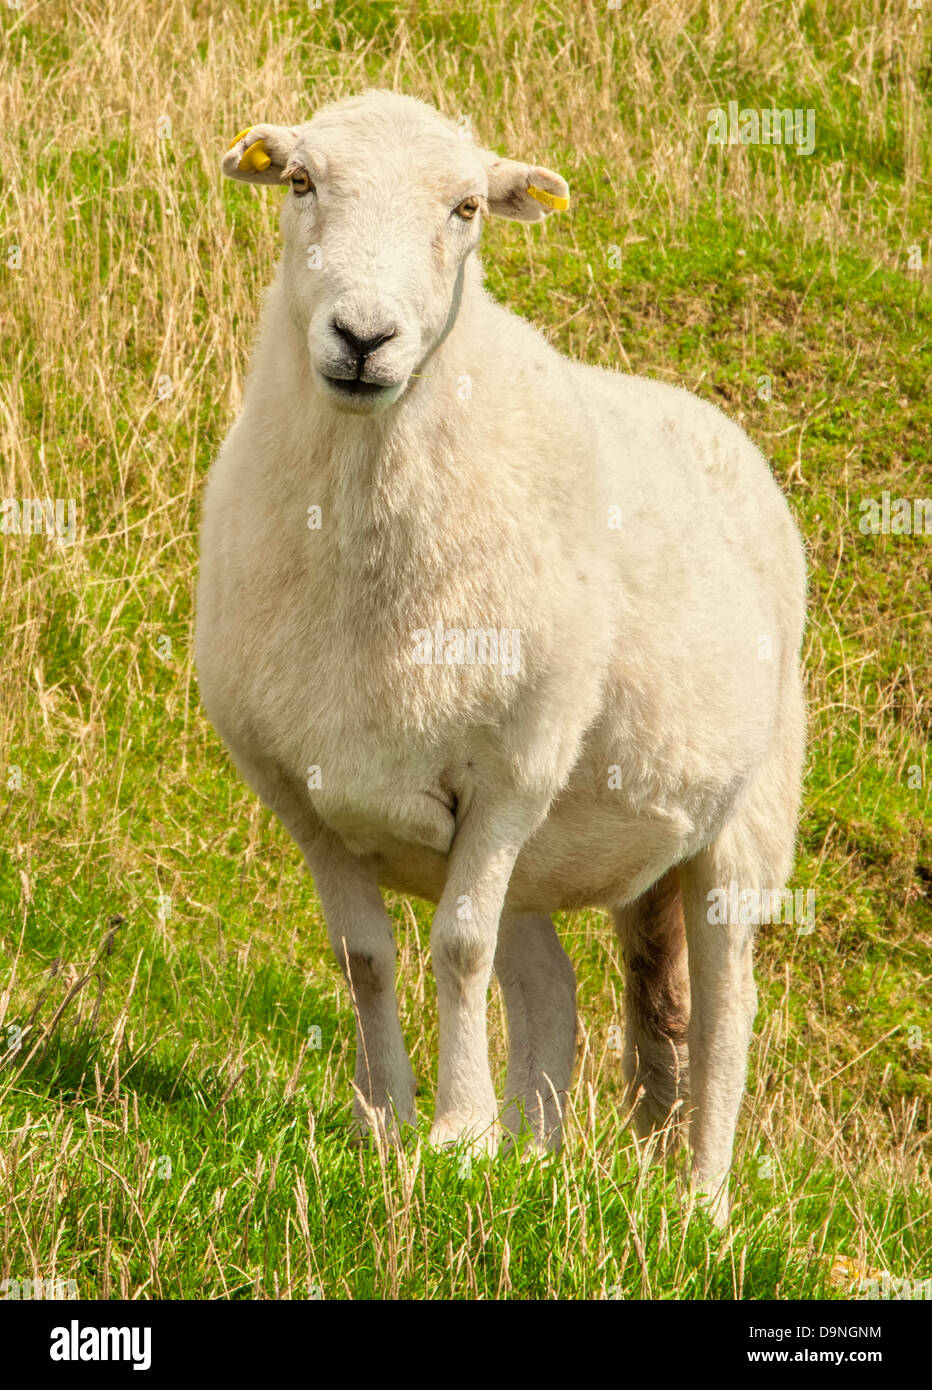 An inquisitive ewe stares directly into the lens. Stock Photo